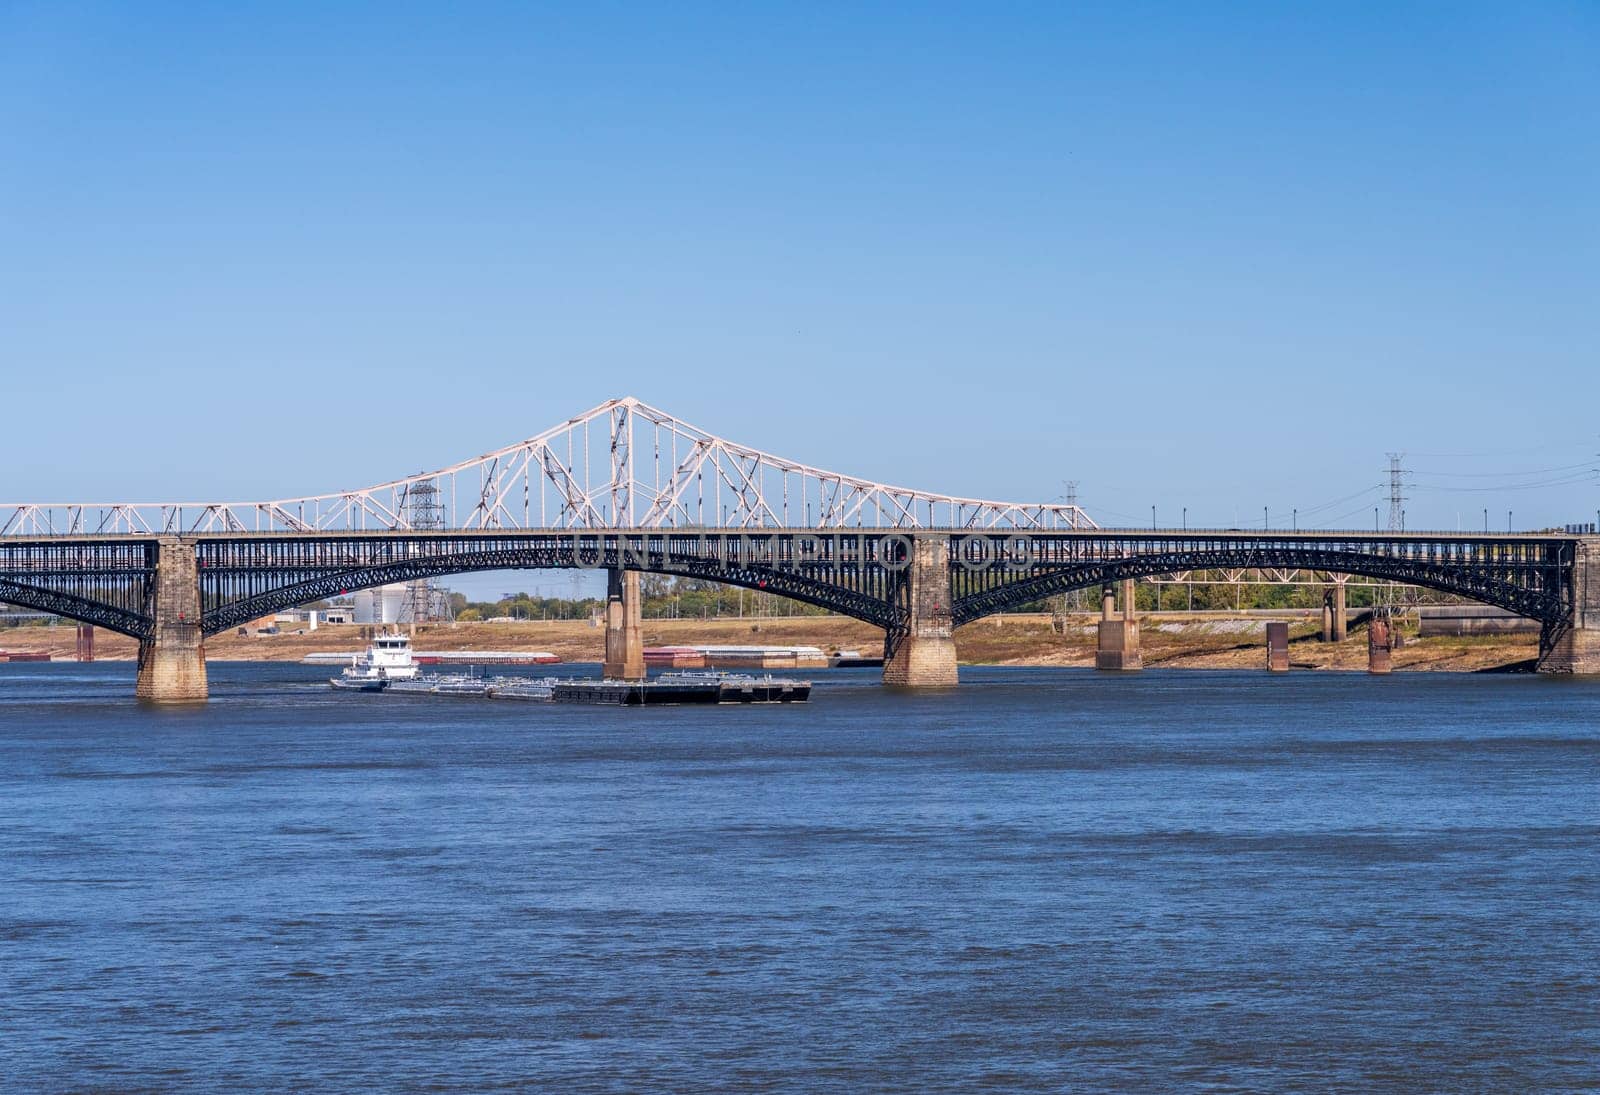 Powerful pusher tugboat with barges of petroleum products under Eads Bridge in St Louis, Missouri